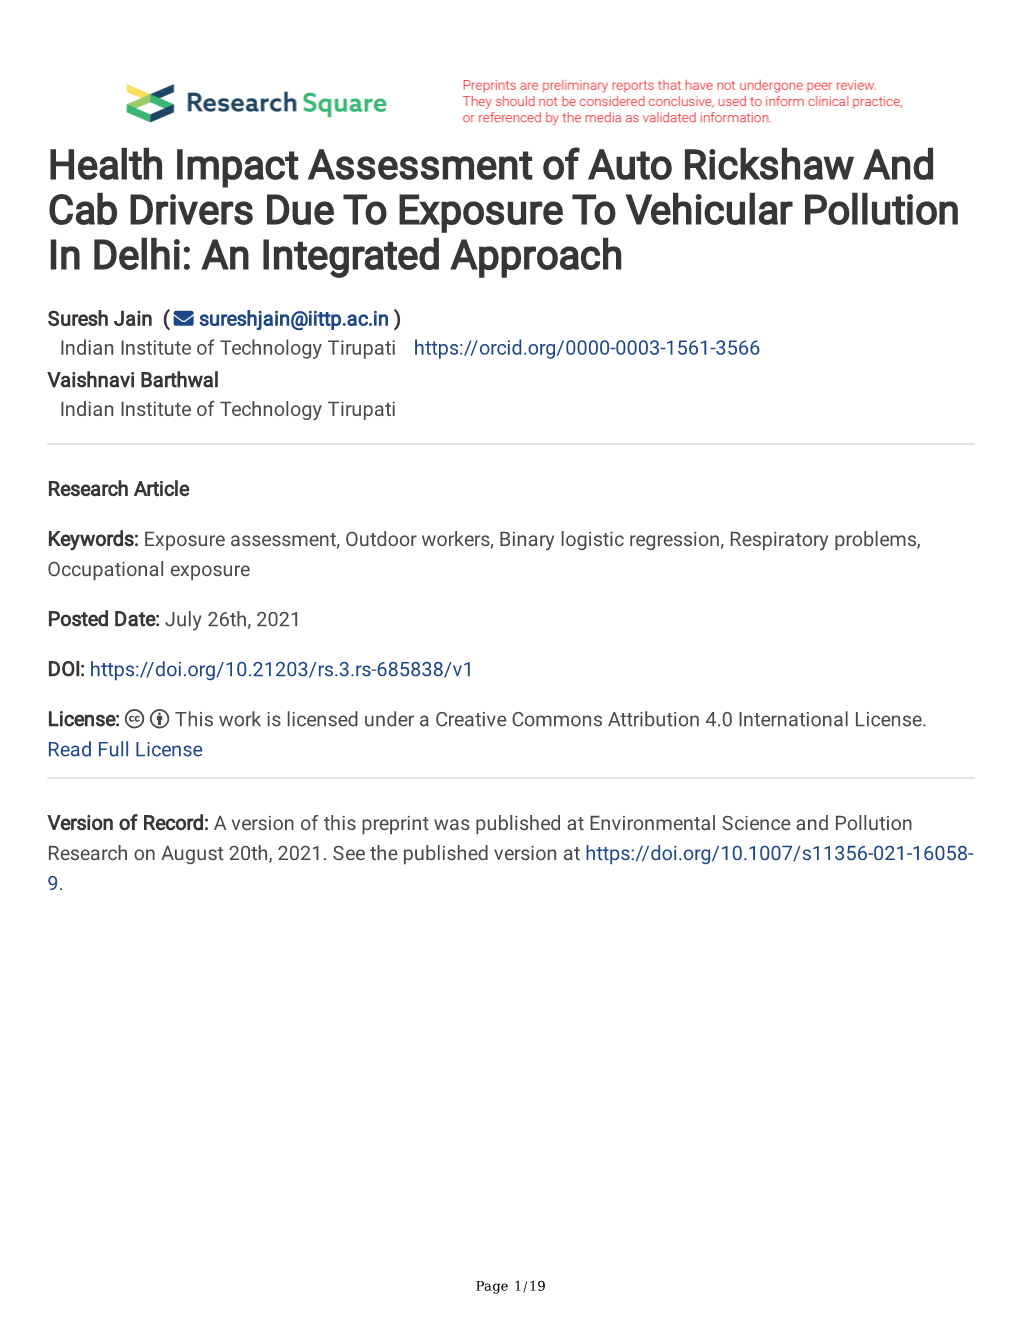 Health Impact Assessment of Auto Rickshaw and Cab Drivers Due to Exposure to Vehicular Pollution in Delhi: an Integrated Approach